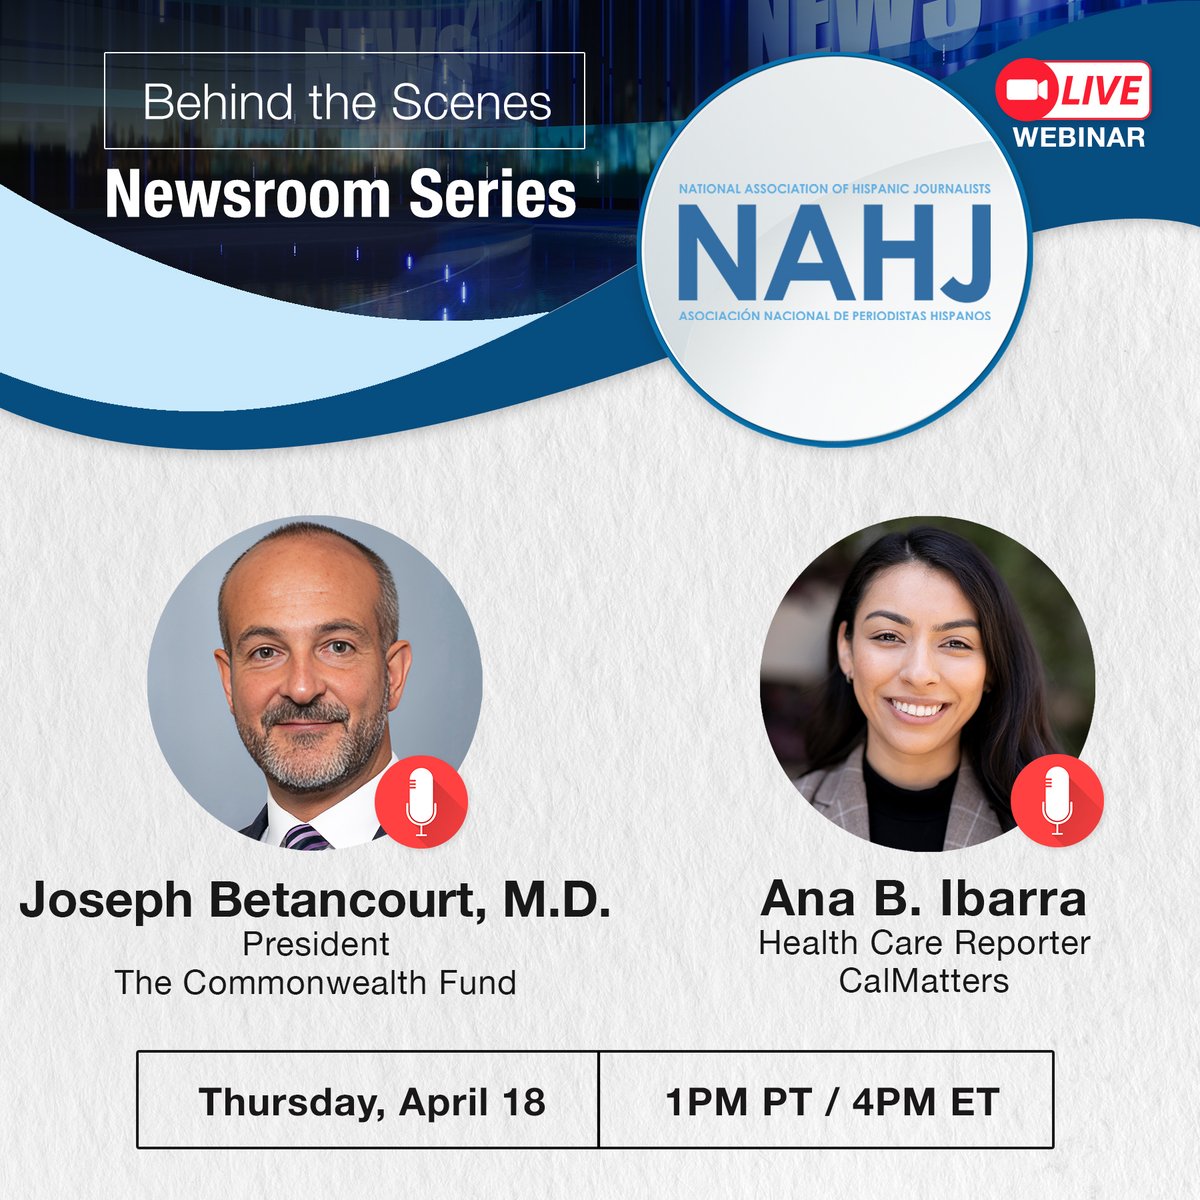 Join Joseph Betancourt, M.D. from @commonwealthfnd and Ana B. Ibarra from @CalMatters in a wide-ranging conversation about the most critical health care issues facing Latinos right now this Thursday, April 18 at 4pm ET. #MoreLatinosInNews Register here ➡️ nahj.memberclicks.net/newsroomcommon…